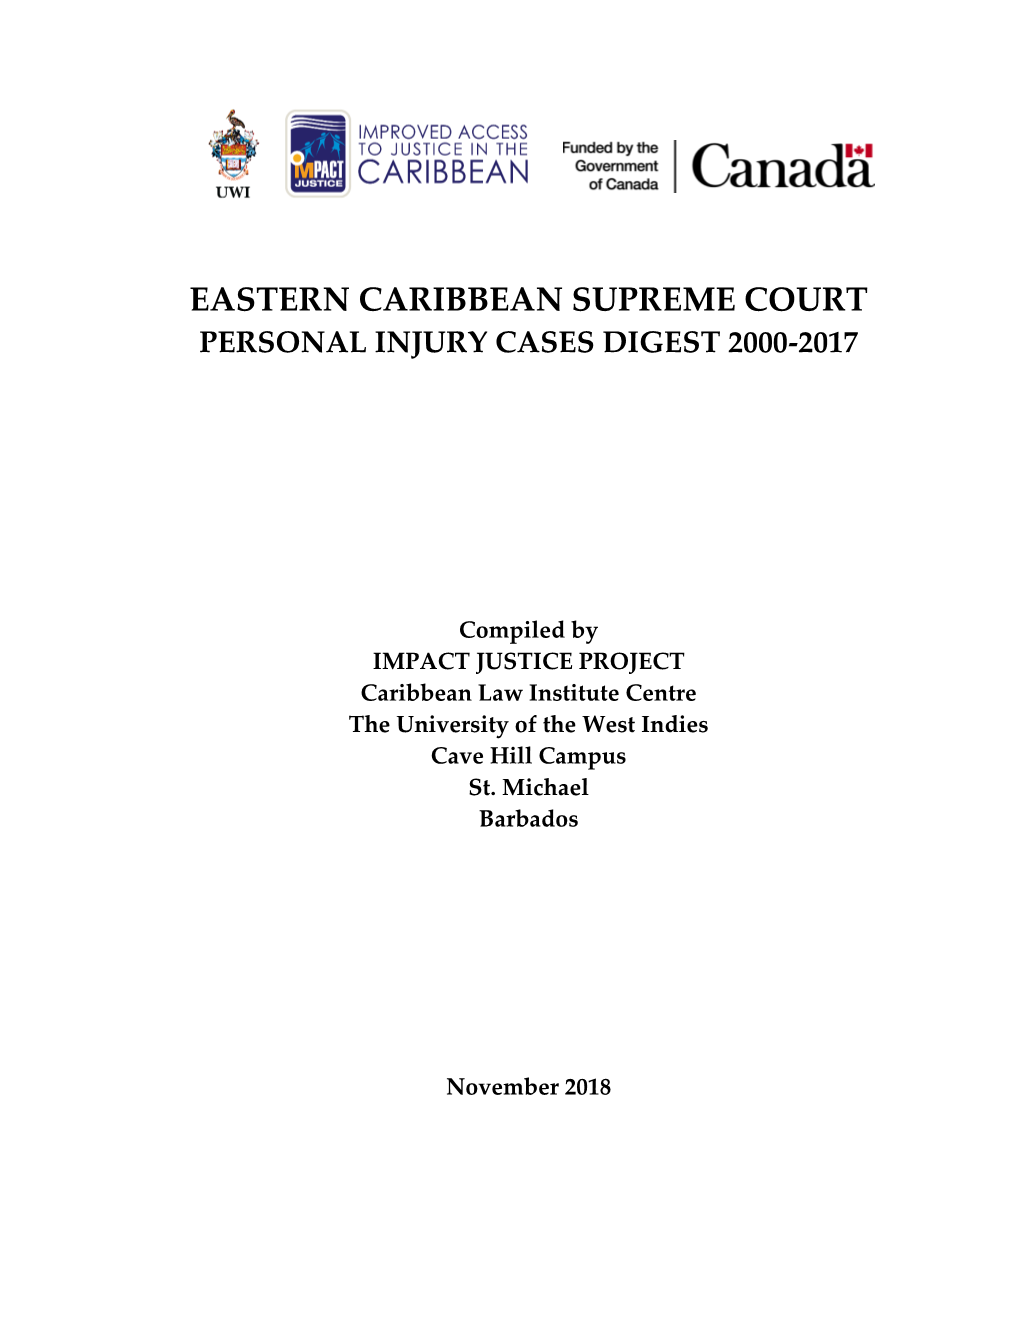 Eastern Caribbean Supreme Court Personal Injury Cases Digest 2000-2017